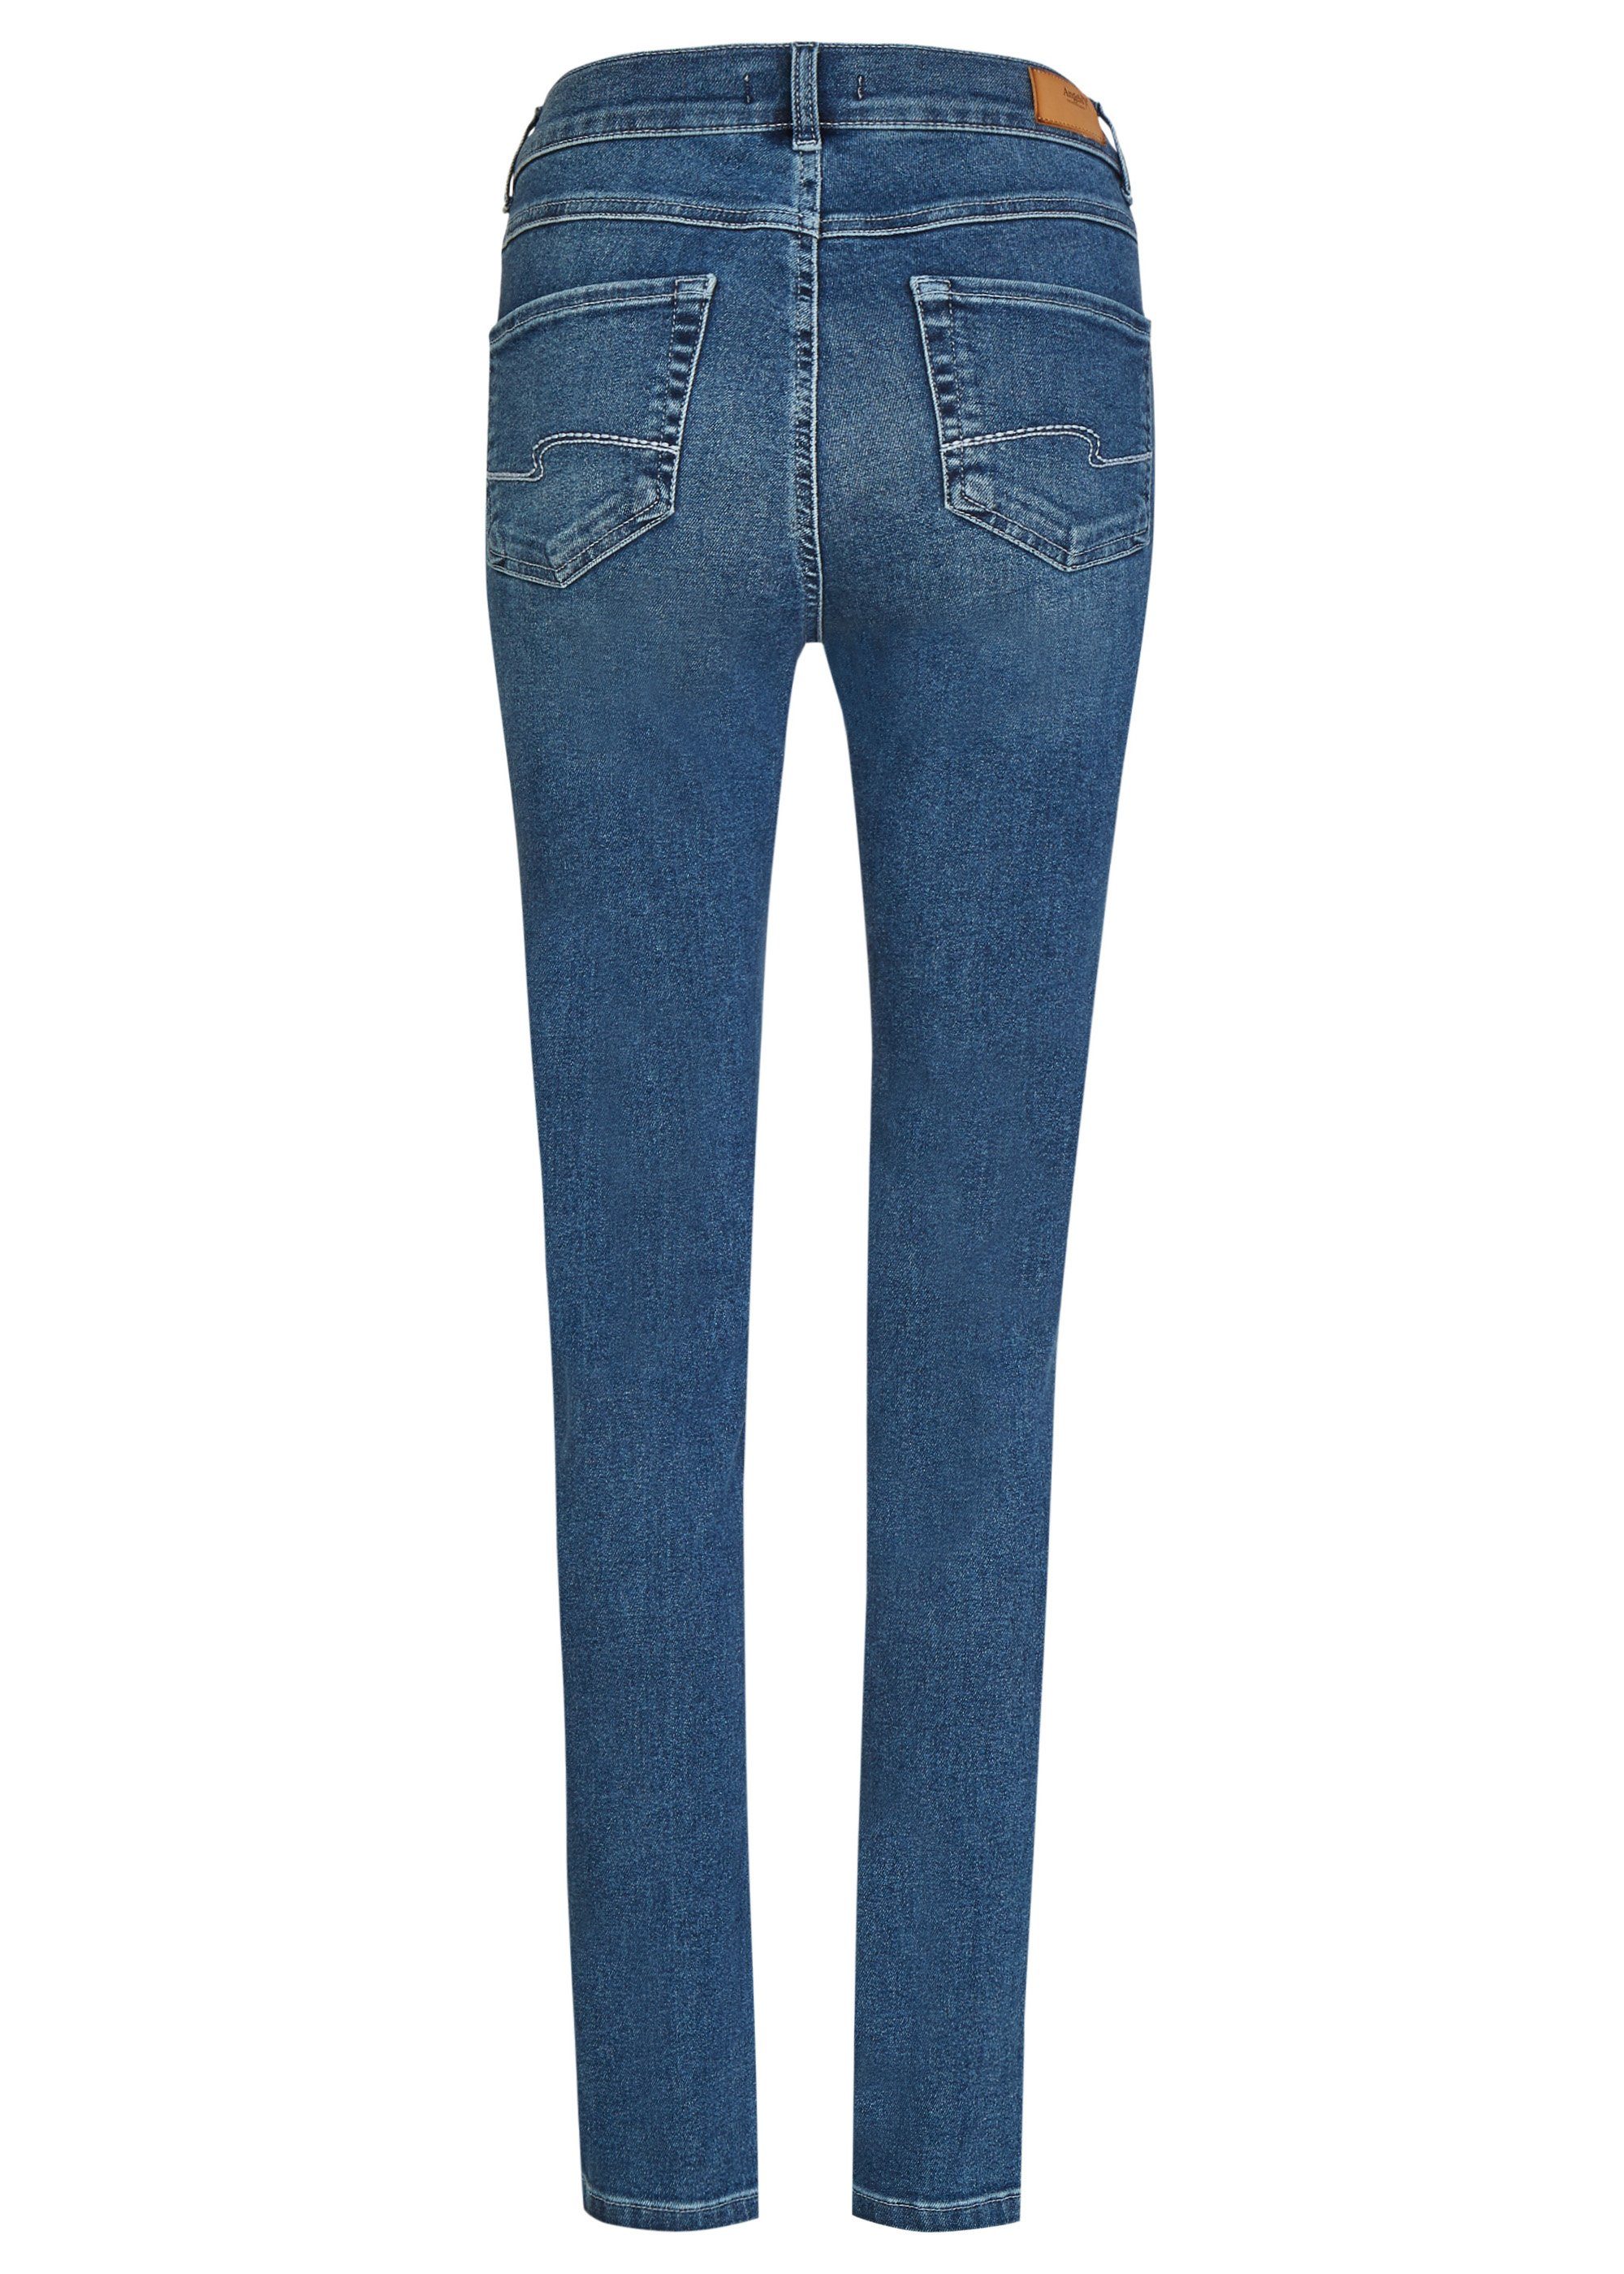 ANGELS Stretch-Jeans strong 325 12.3358 SKINNY ANGELS used - JEANS blue STRETCH mid